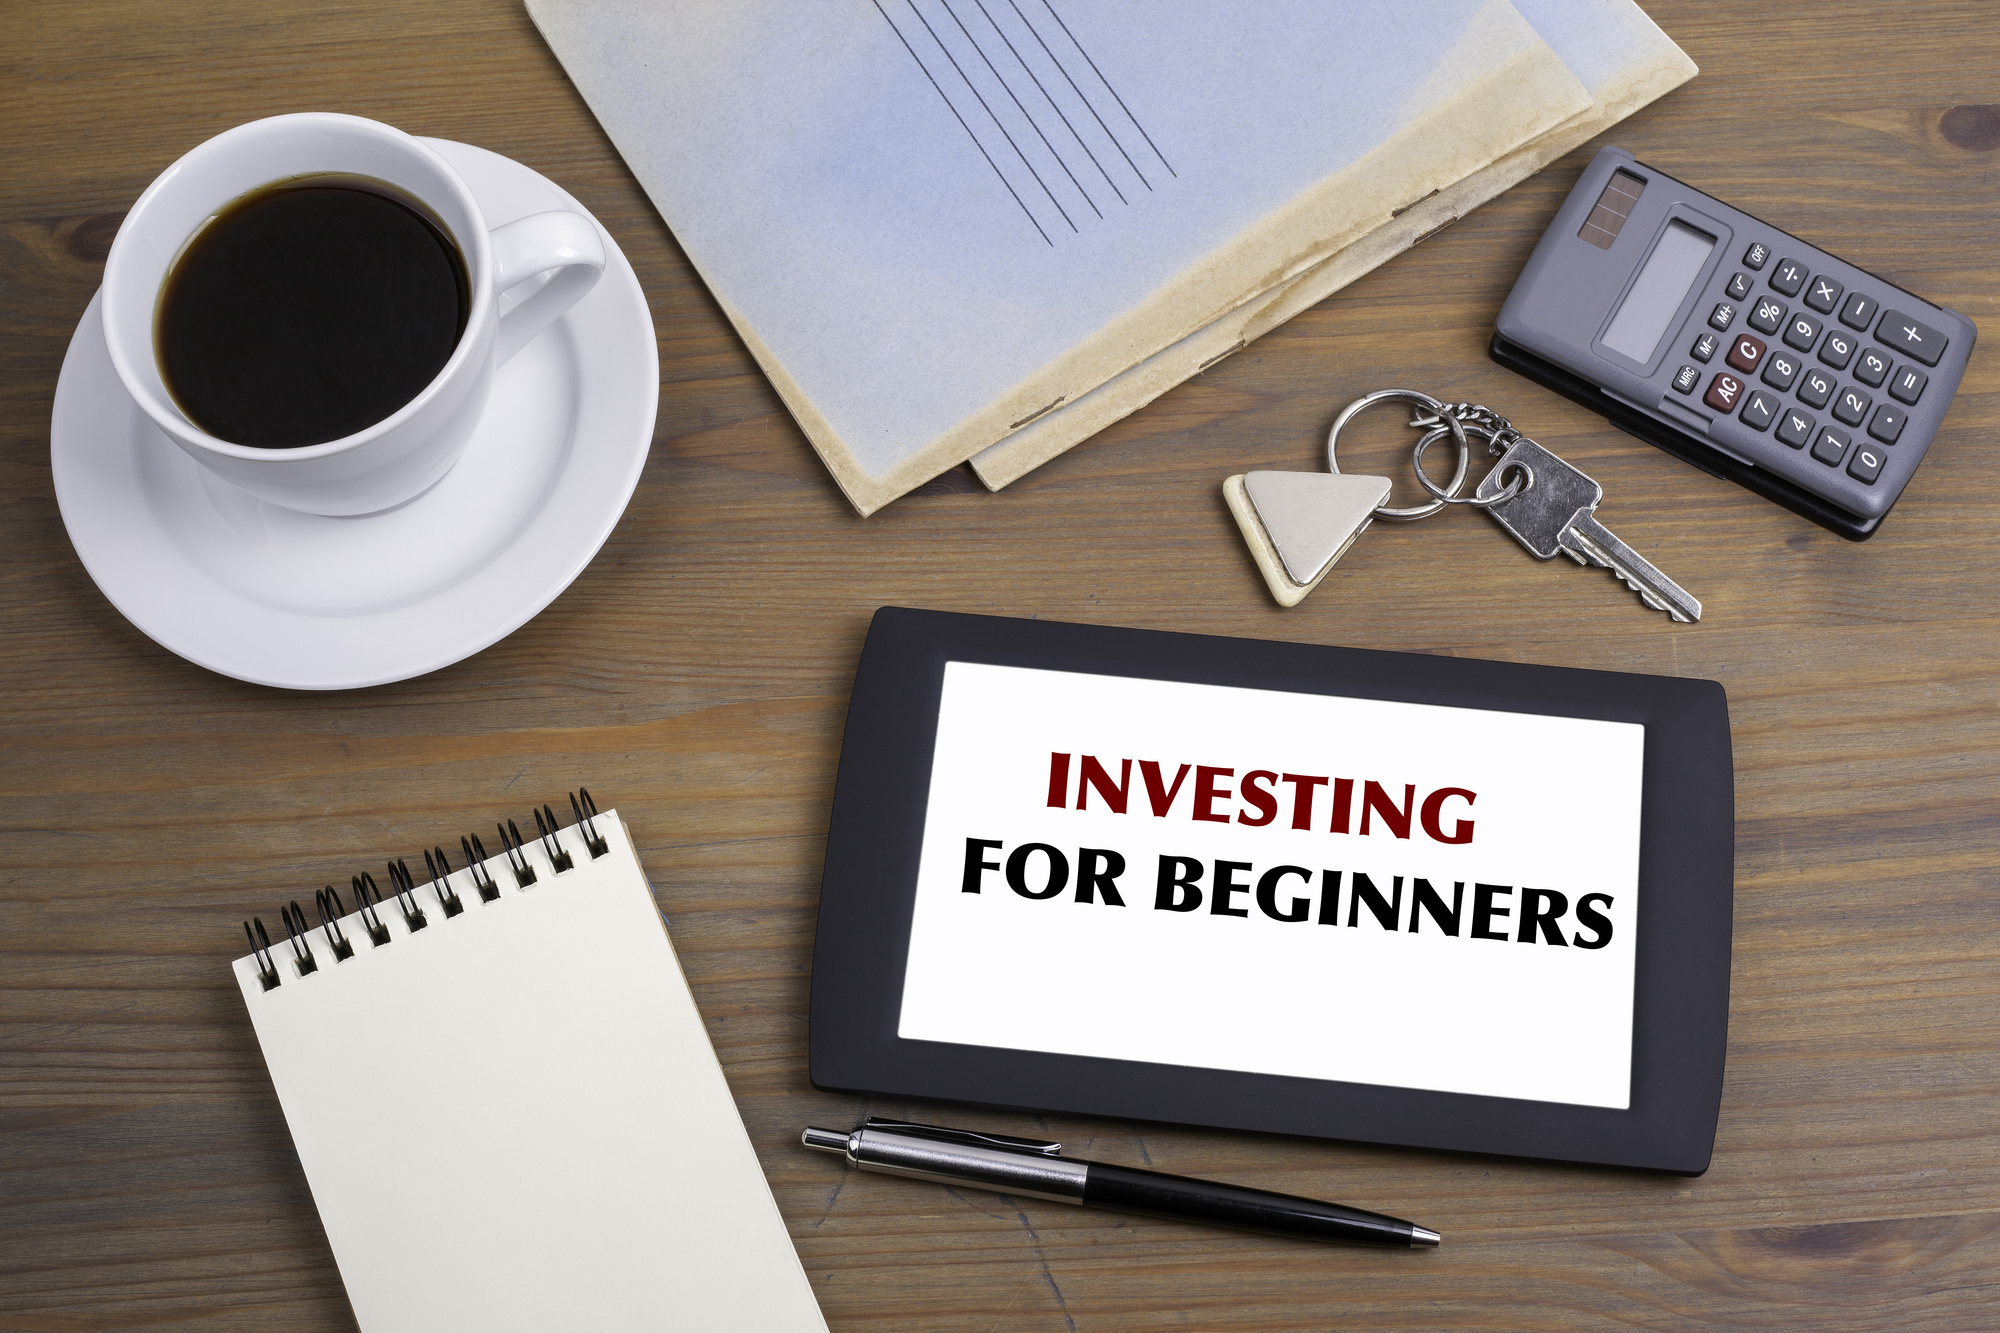 Learning and applying the investing tips in this guide will set you up for long-term financial success. Click here to check out all the insights!